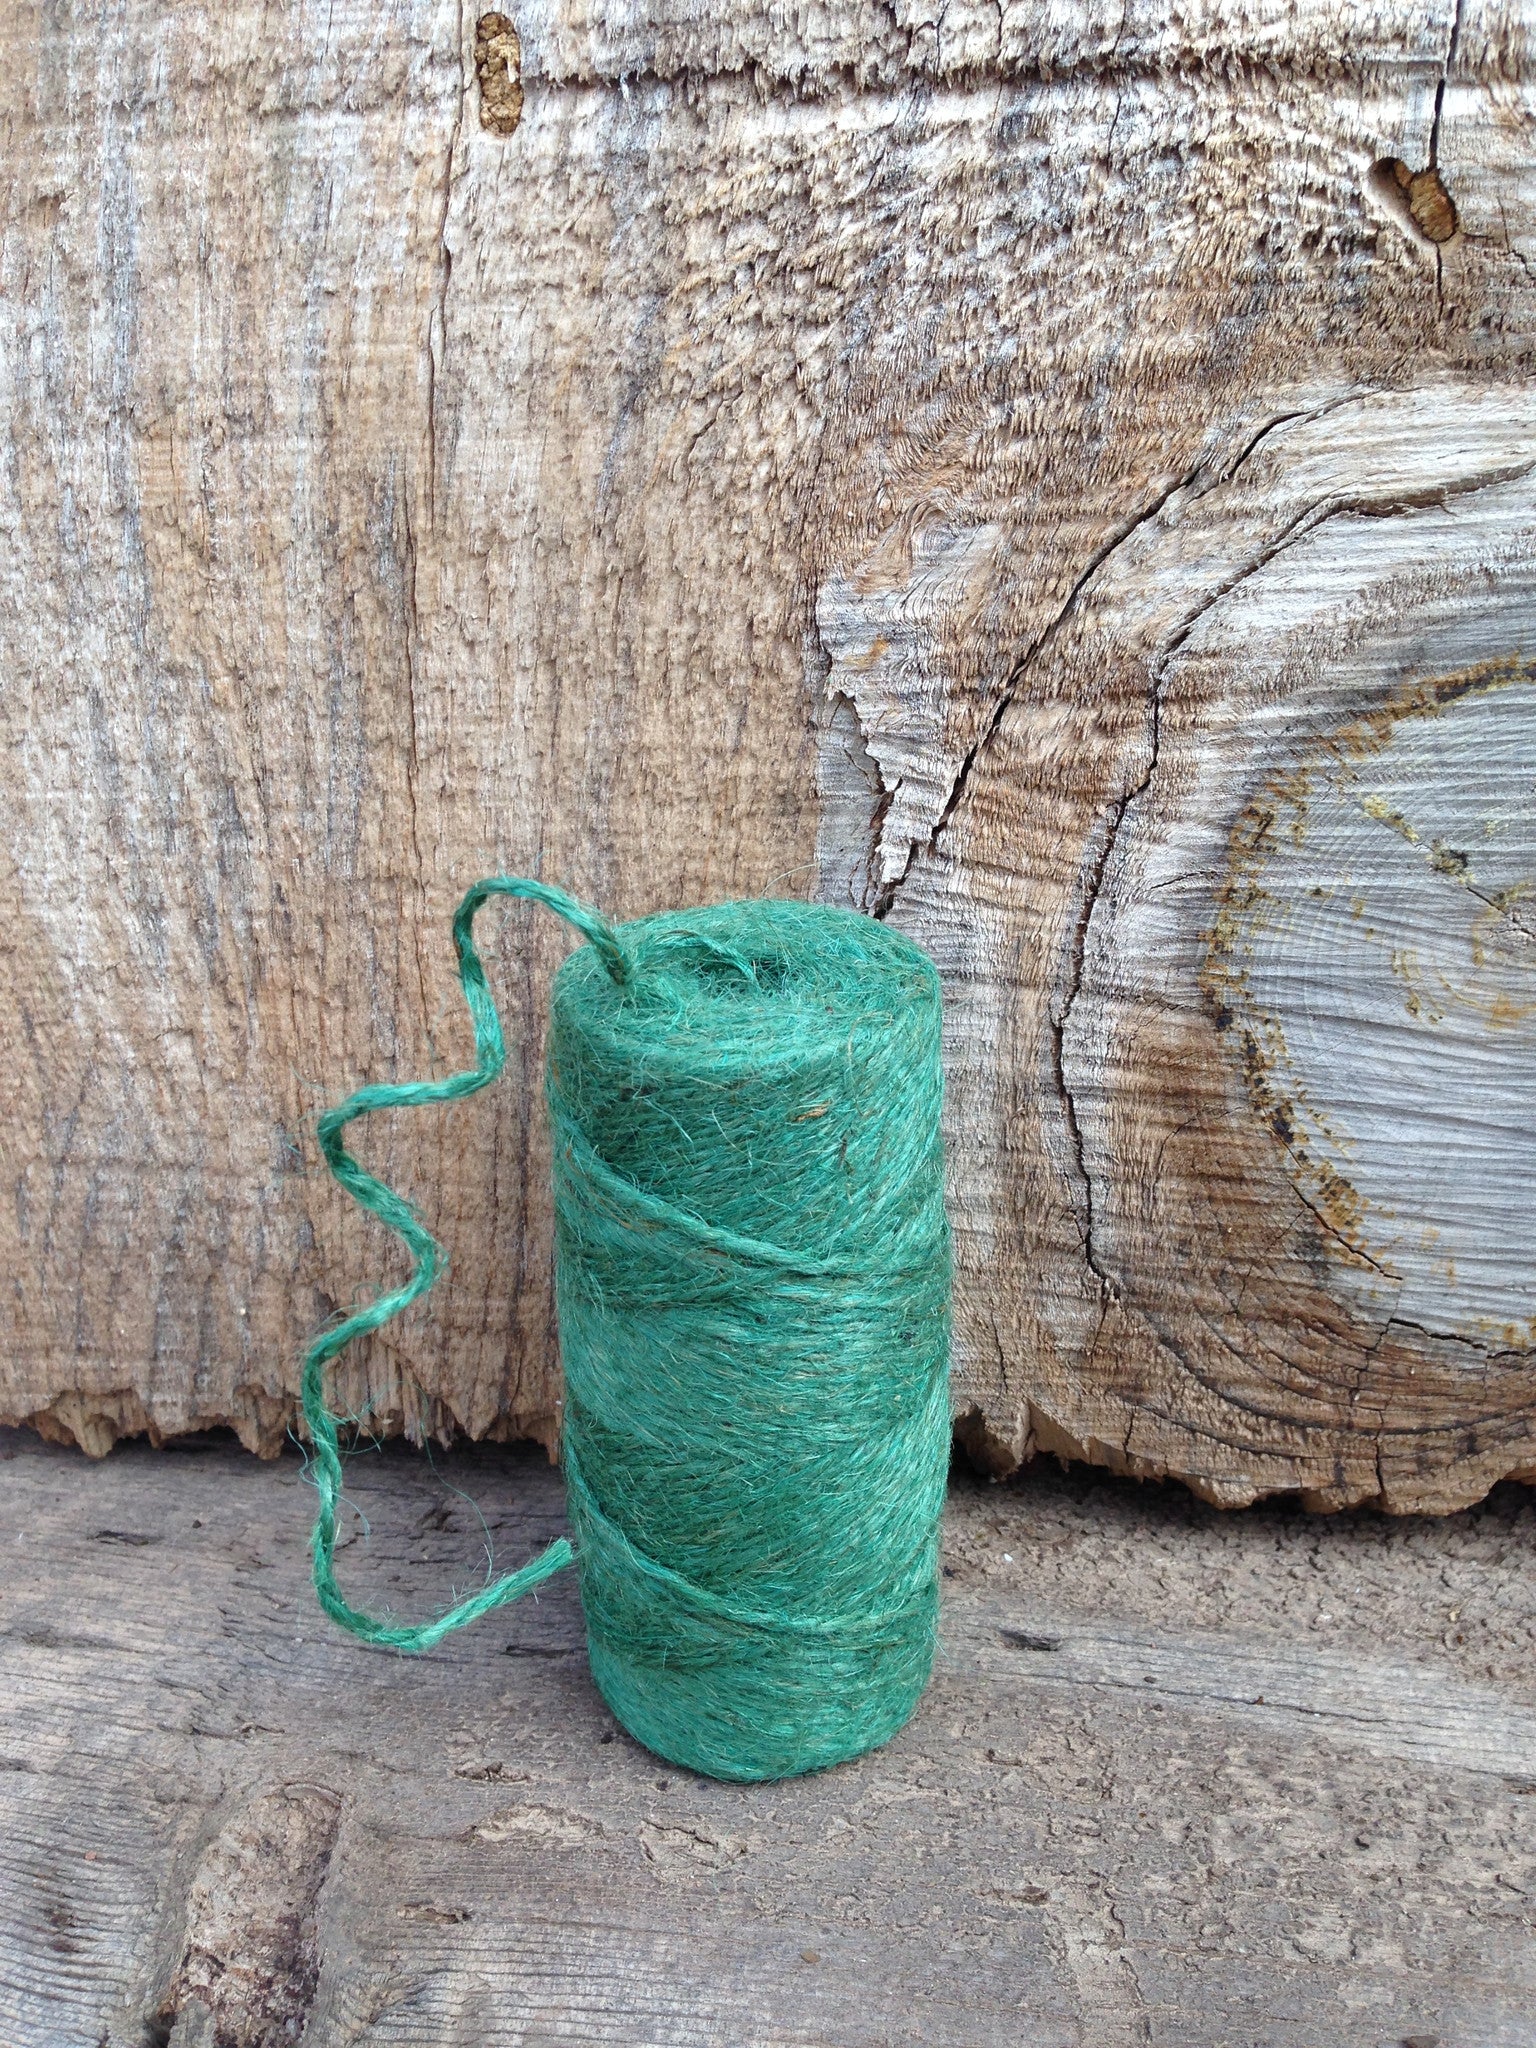 Rapiclip 325 Ft. Green Jute Garden Twine Plant Tie with Cutting